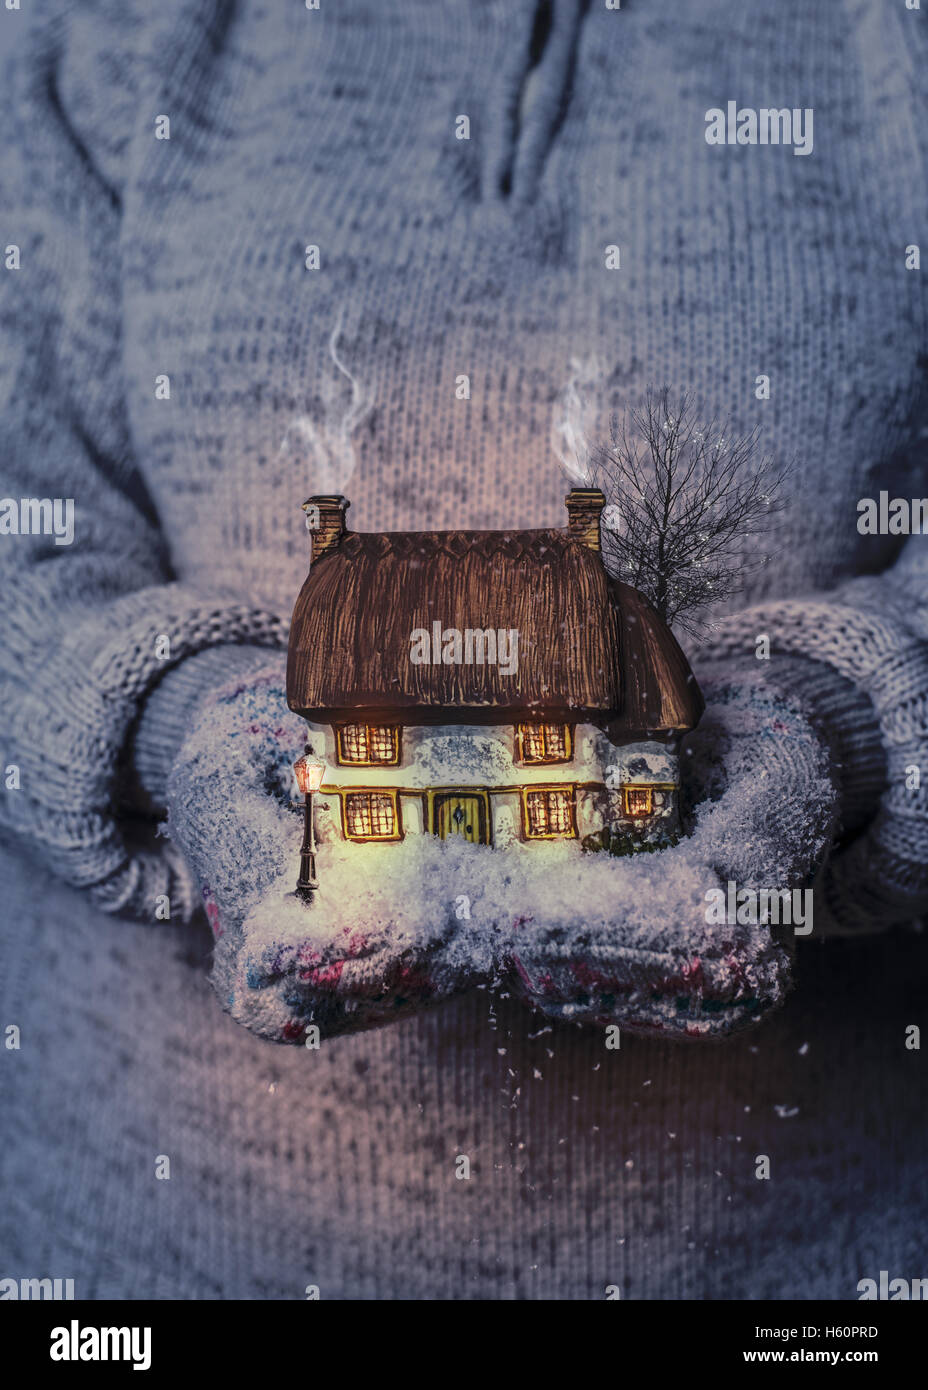 Winter cottage scene in gloved hands Stock Photo